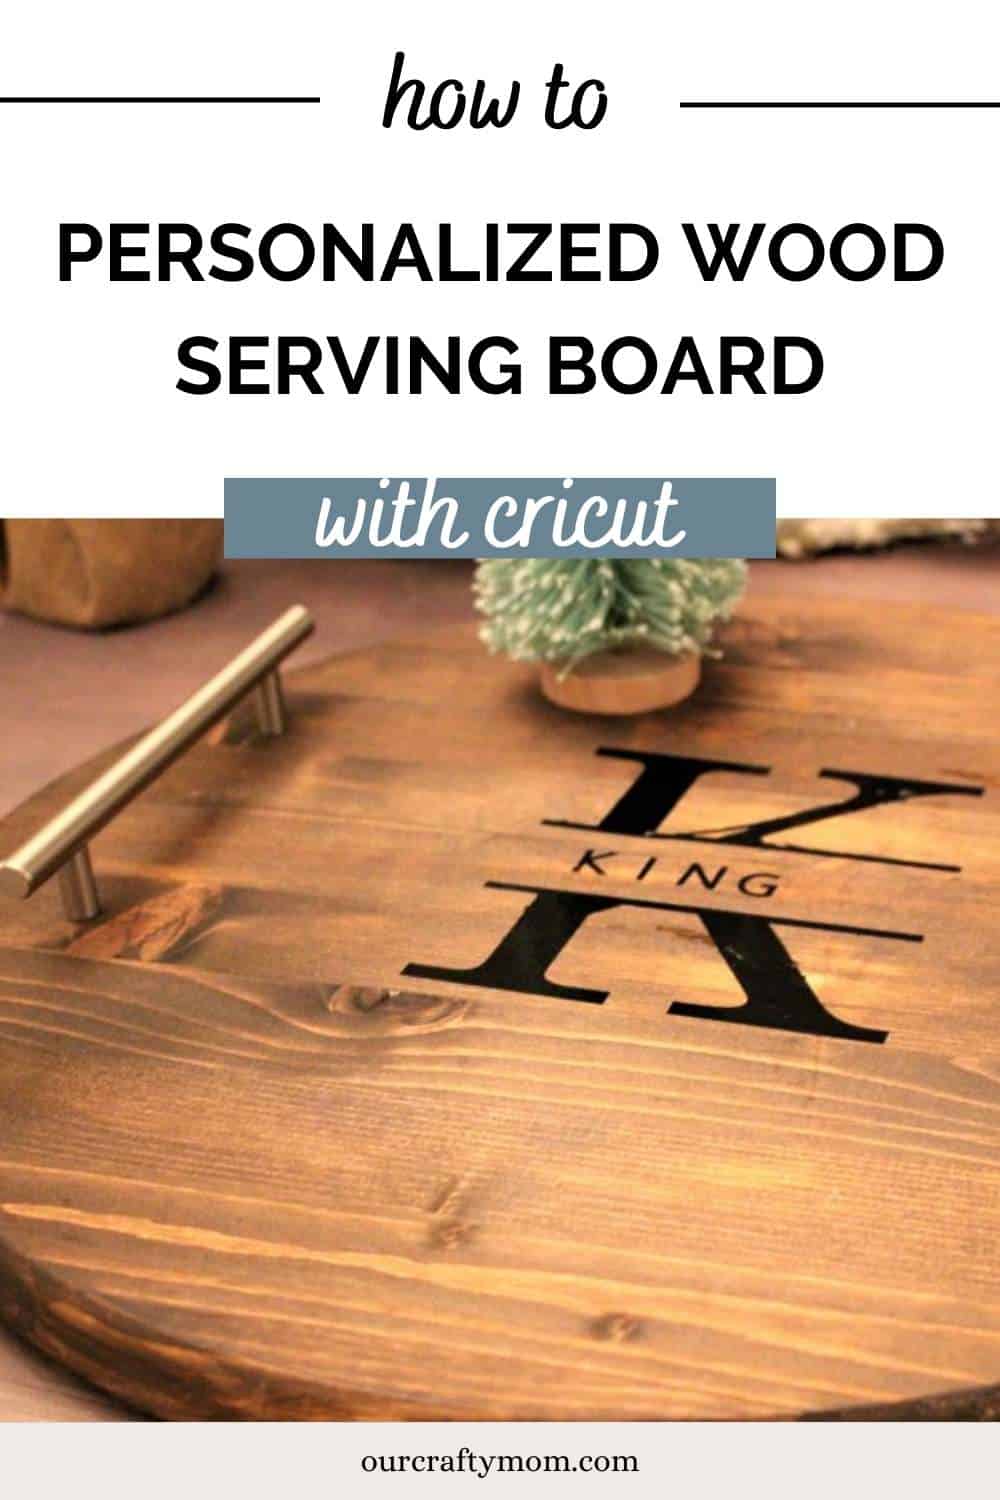 wood serving board pin with text